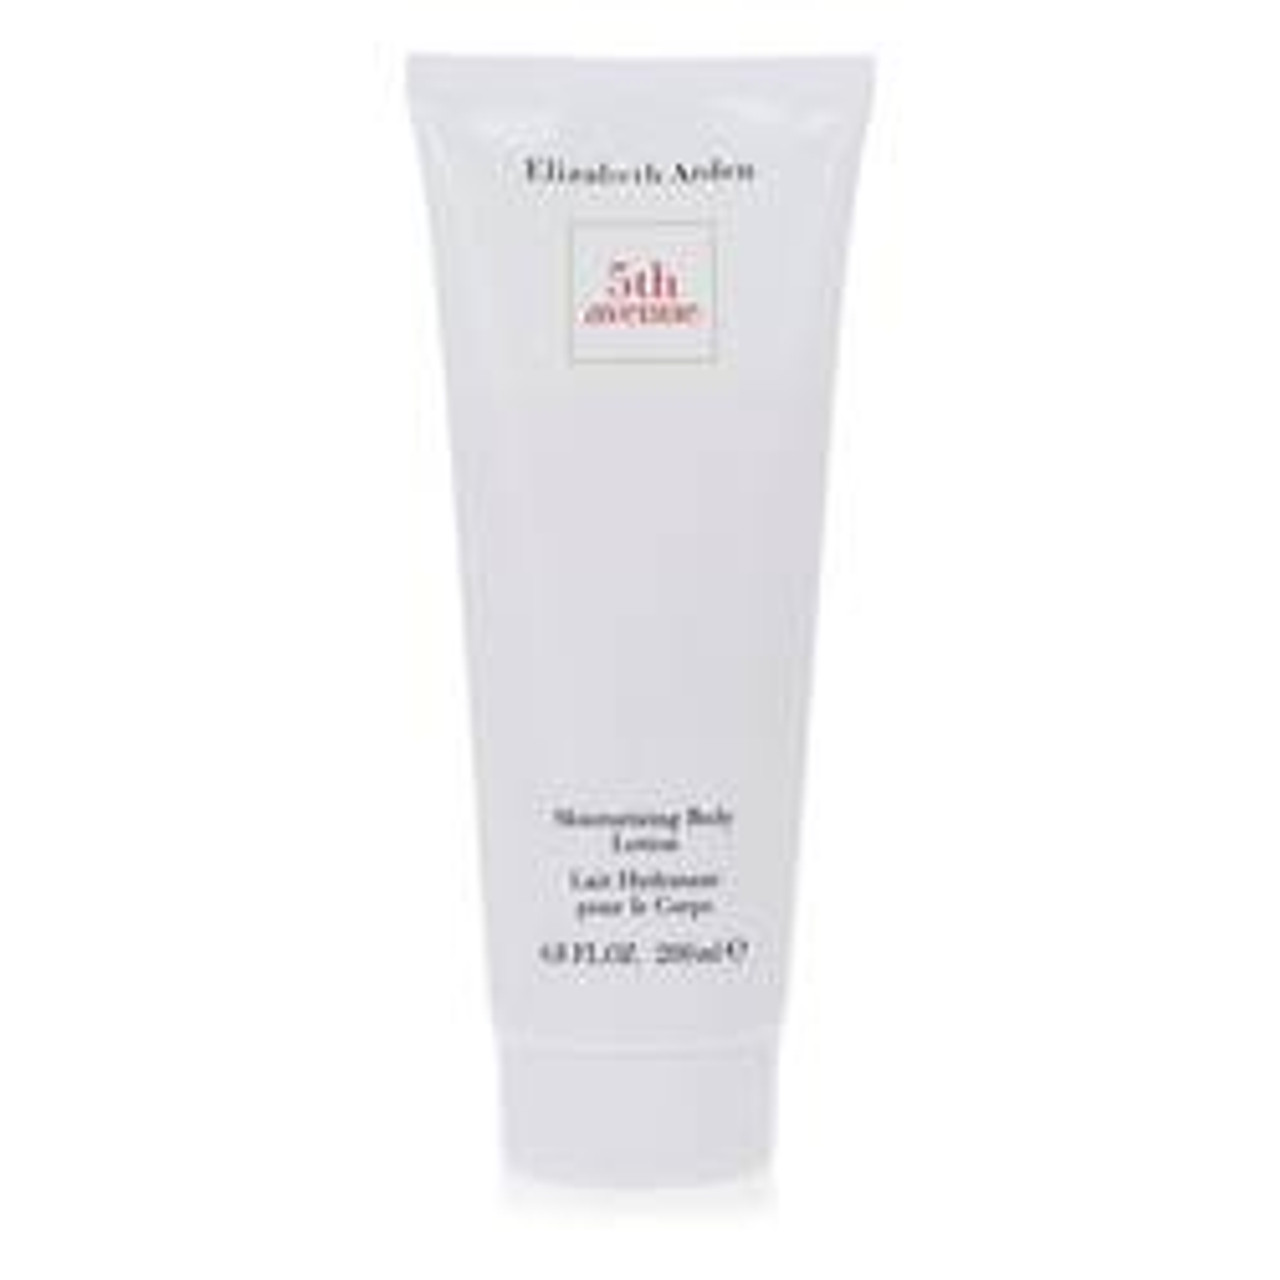 5th Avenue Perfume By Elizabeth Arden Body Lotion 6.8 oz for Women - [From 60.00 - Choose pk Qty ] - *Ships from Miami